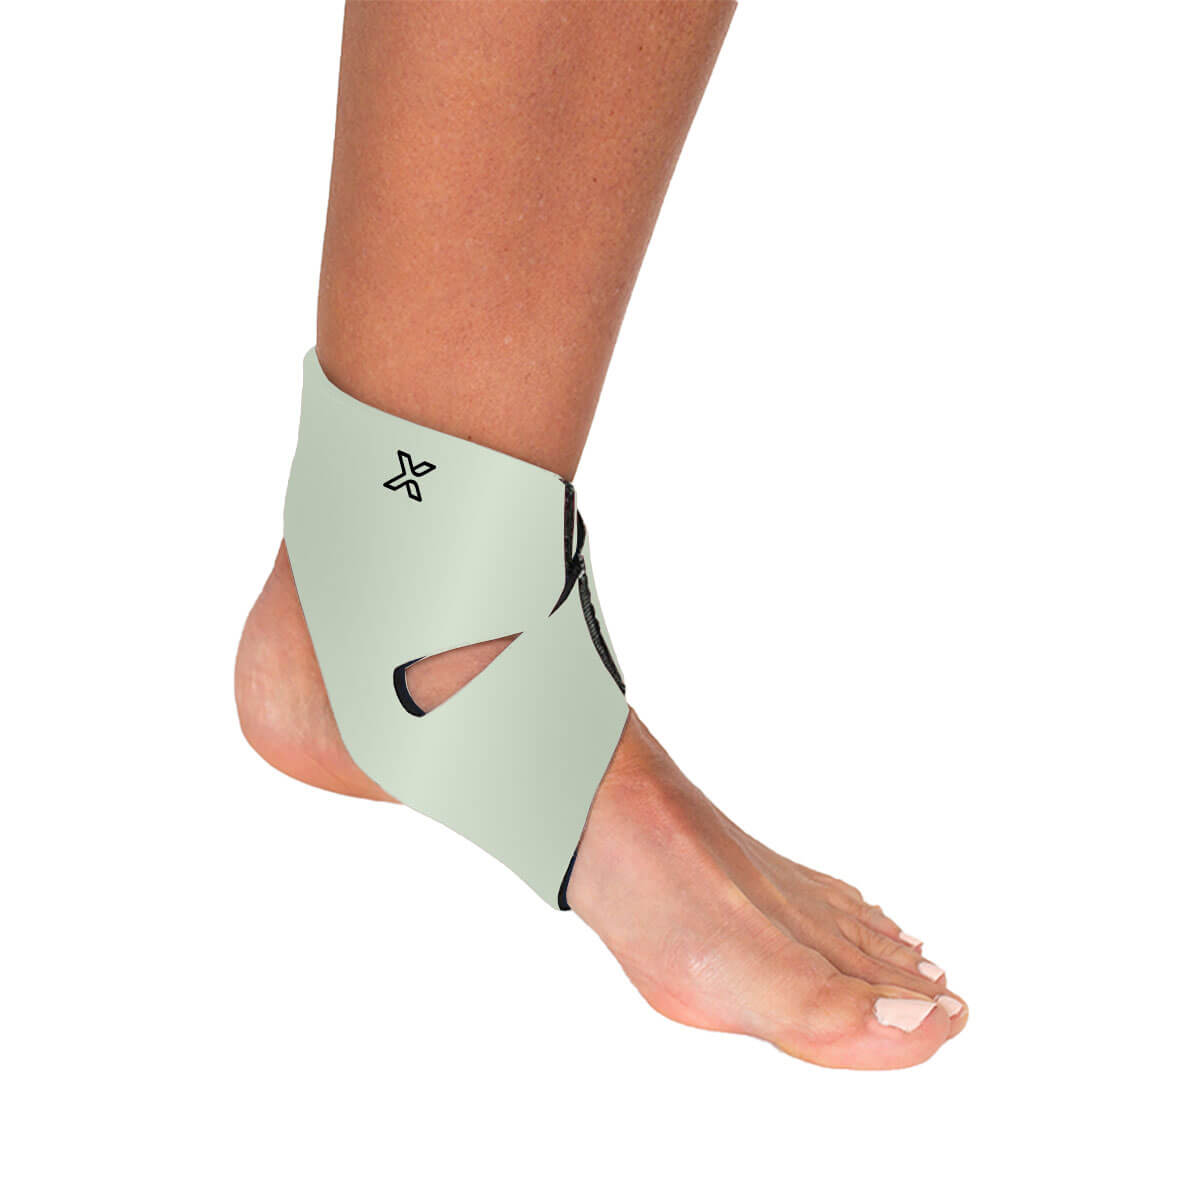 CFR Ankle Brace Compression Support Sleeve for India | Ubuy